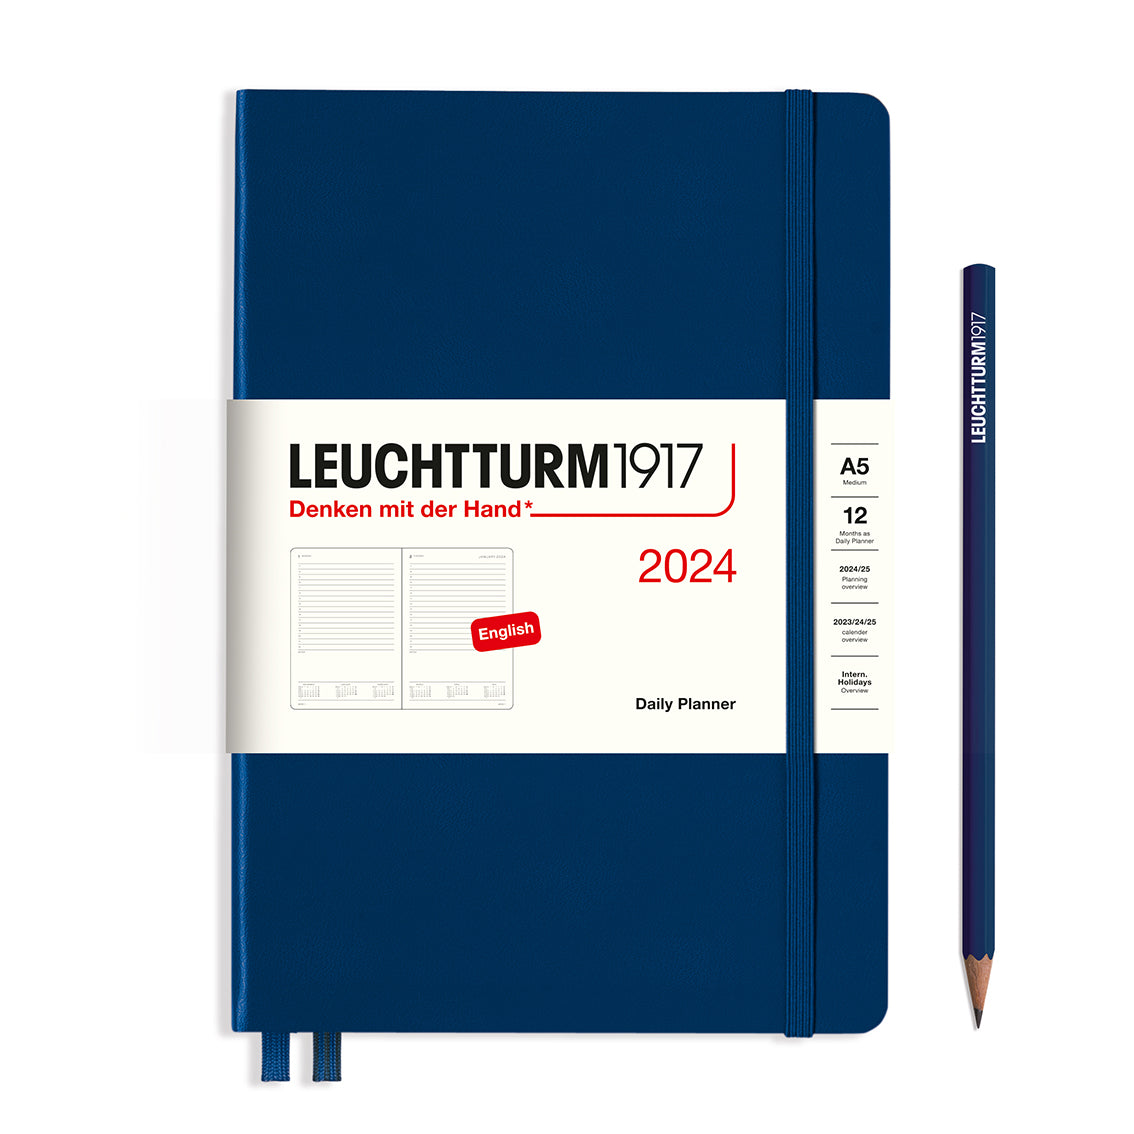 An image of a navy planner with a navy elastic band holding it together and a cream paper wrap around the middle stating the business name Leuchtturm1917, that it is for the year 2024, it is a daily planner, is A5 in size and an English language version. It has an image on the wrap showing the inside layout which is 1 day per page. A navy pencil is shown at the side of the planner.